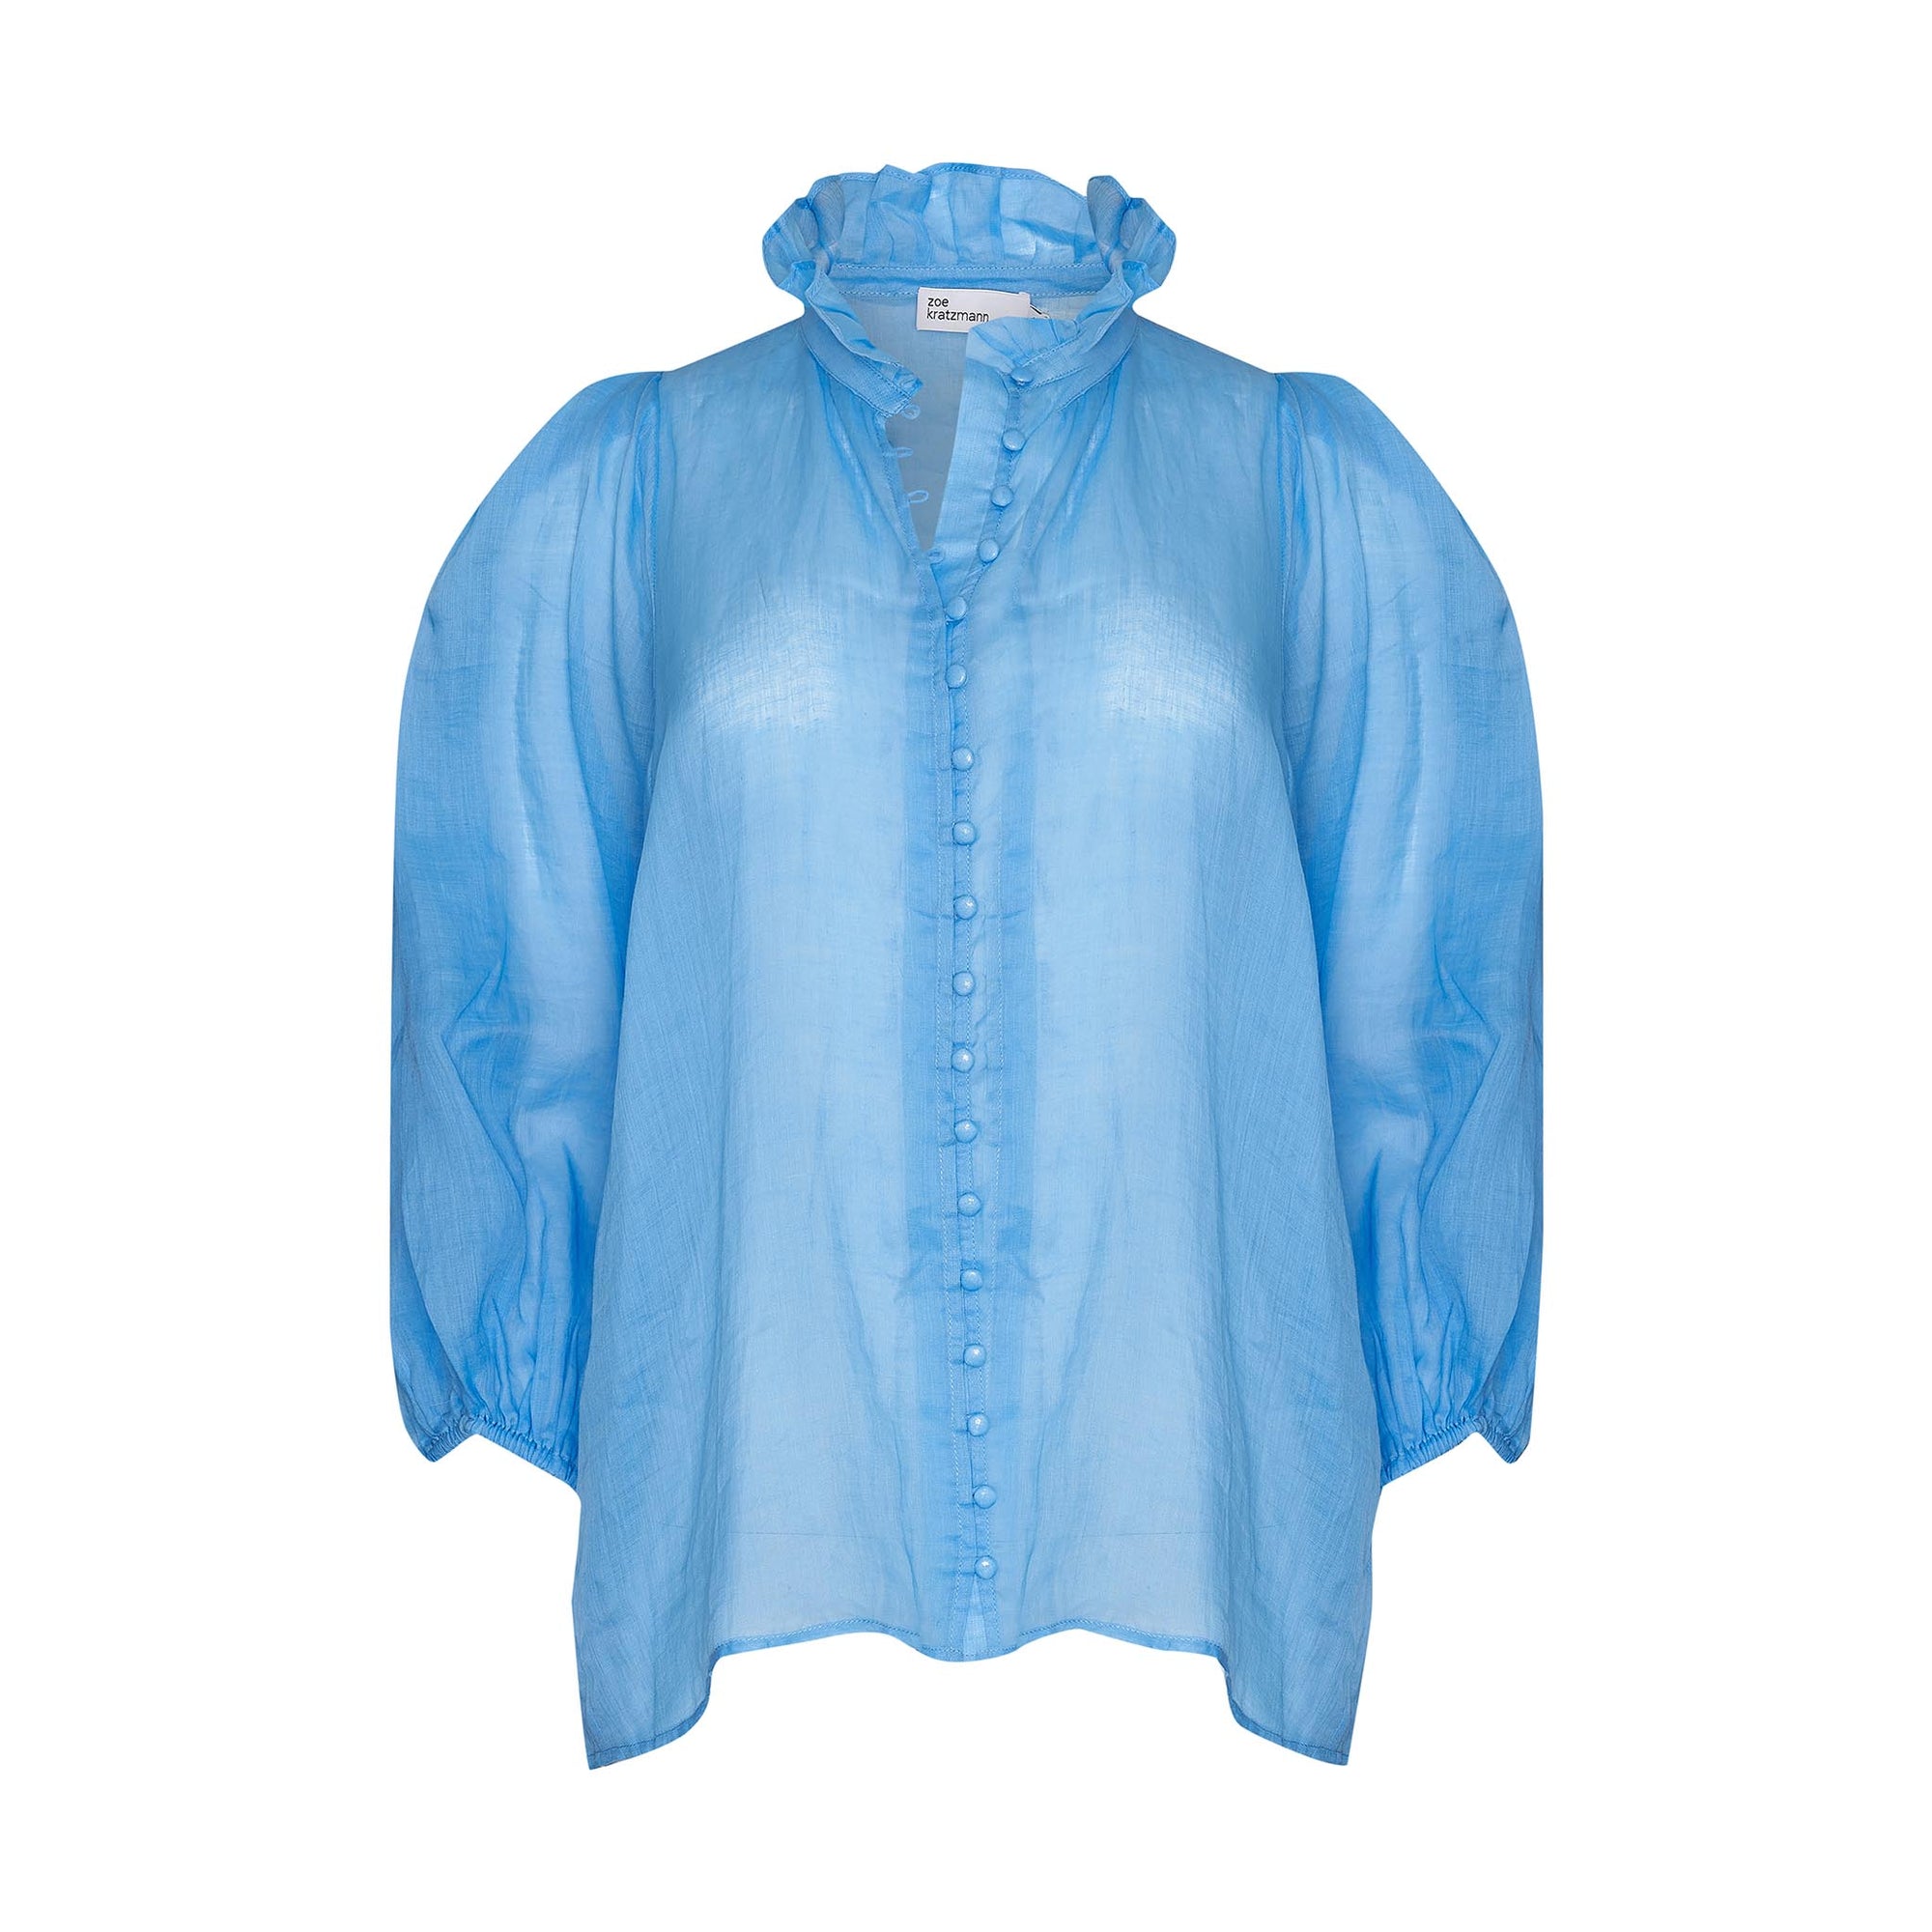 blue, ruffle neck collar, buttons down centre, mid length sleeve, shirt, product image